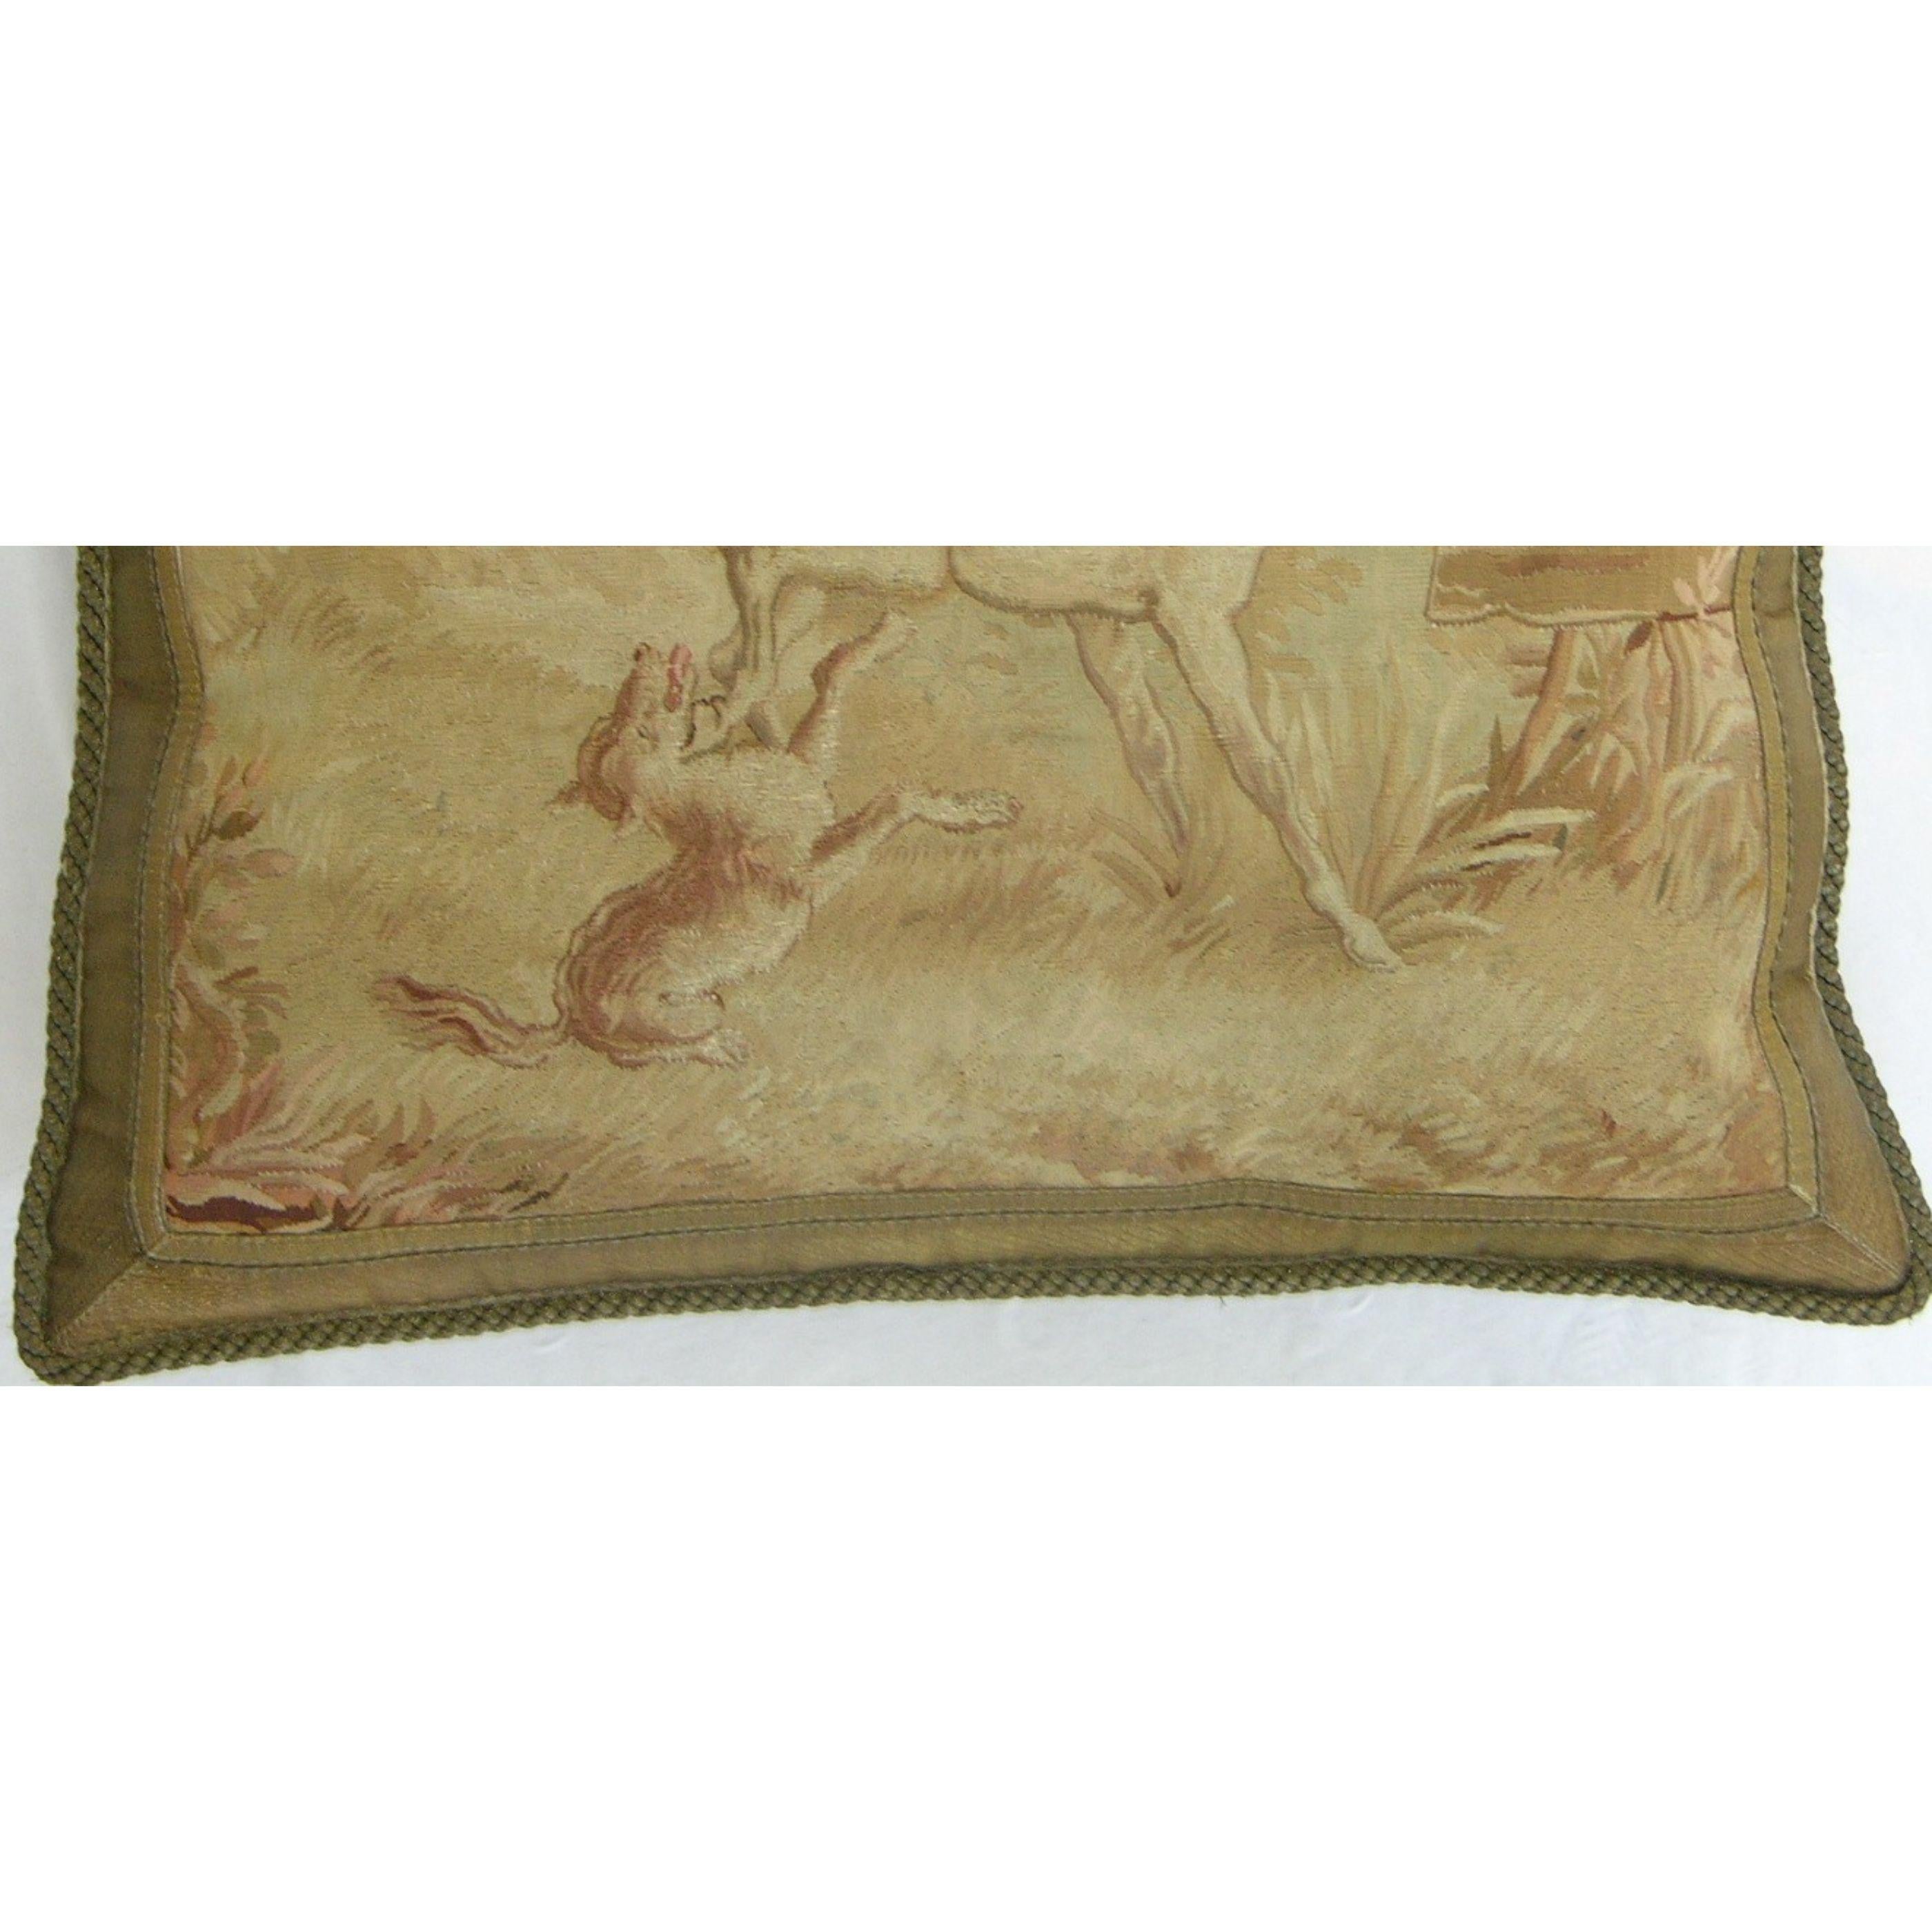 Circa 1850 Antique French Aubusson Tapestry Pillow In Good Condition For Sale In Los Angeles, US